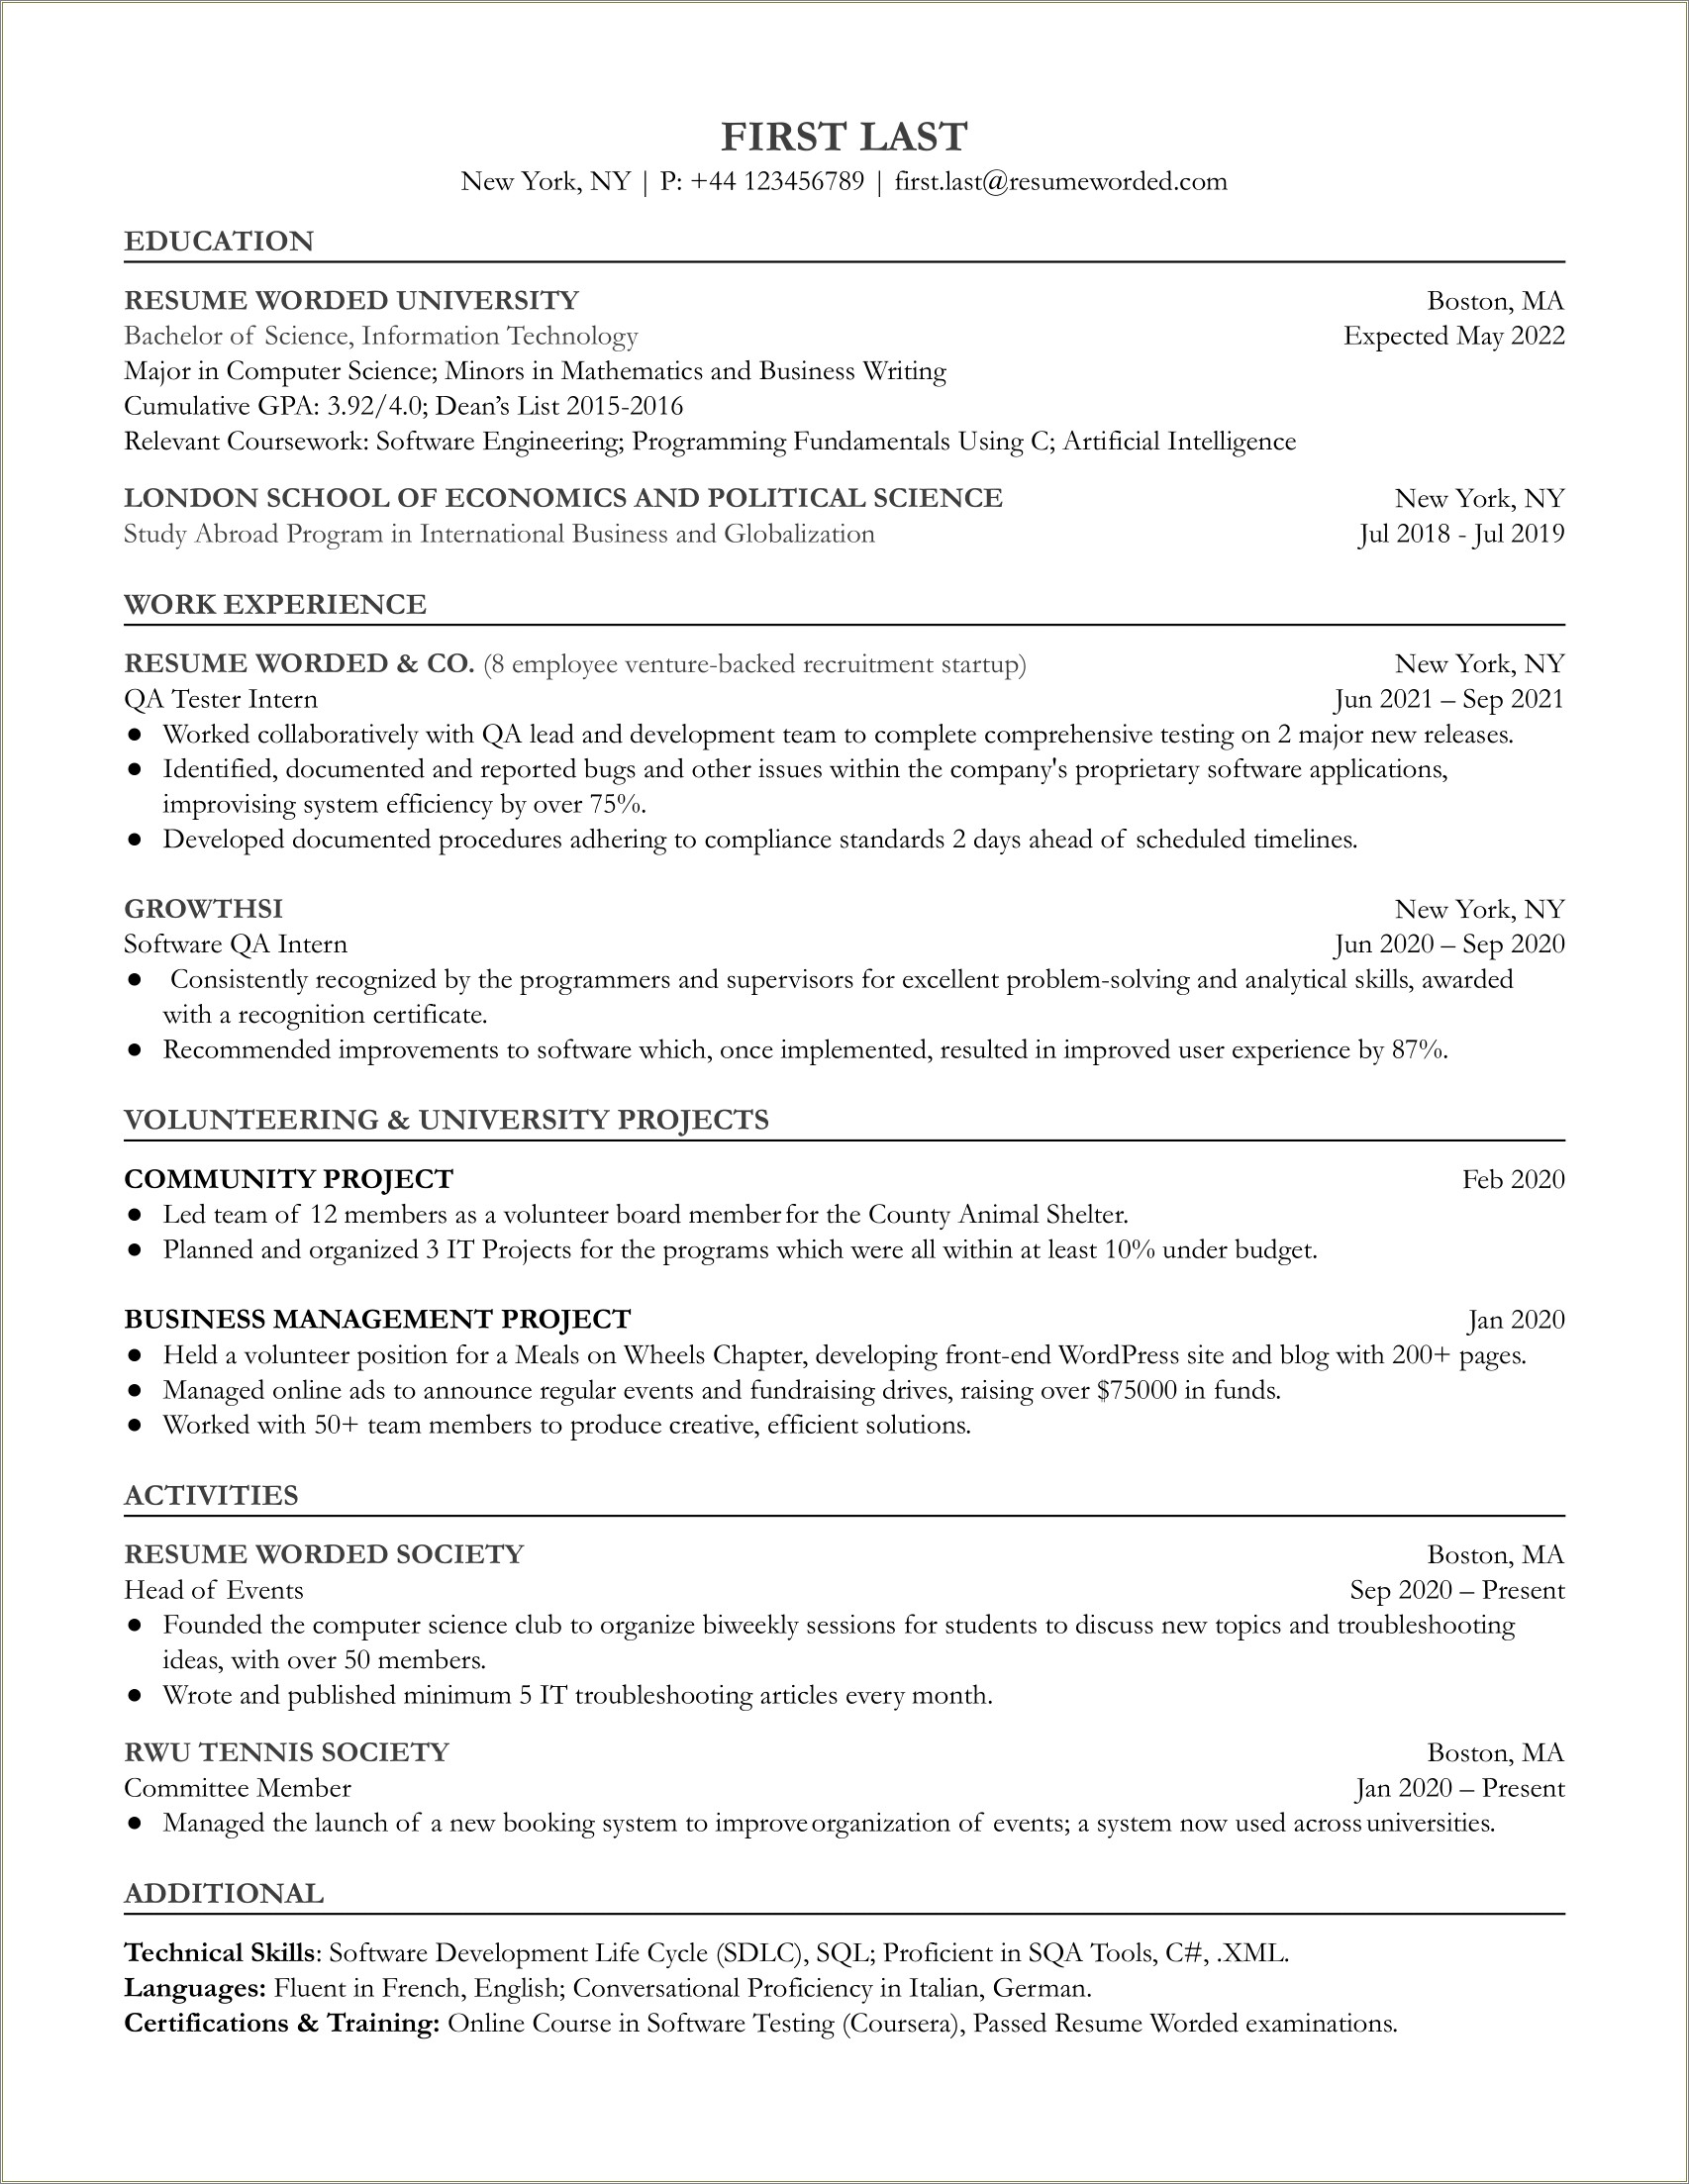 Manual Testing Resume Sample For 2 Years Experience